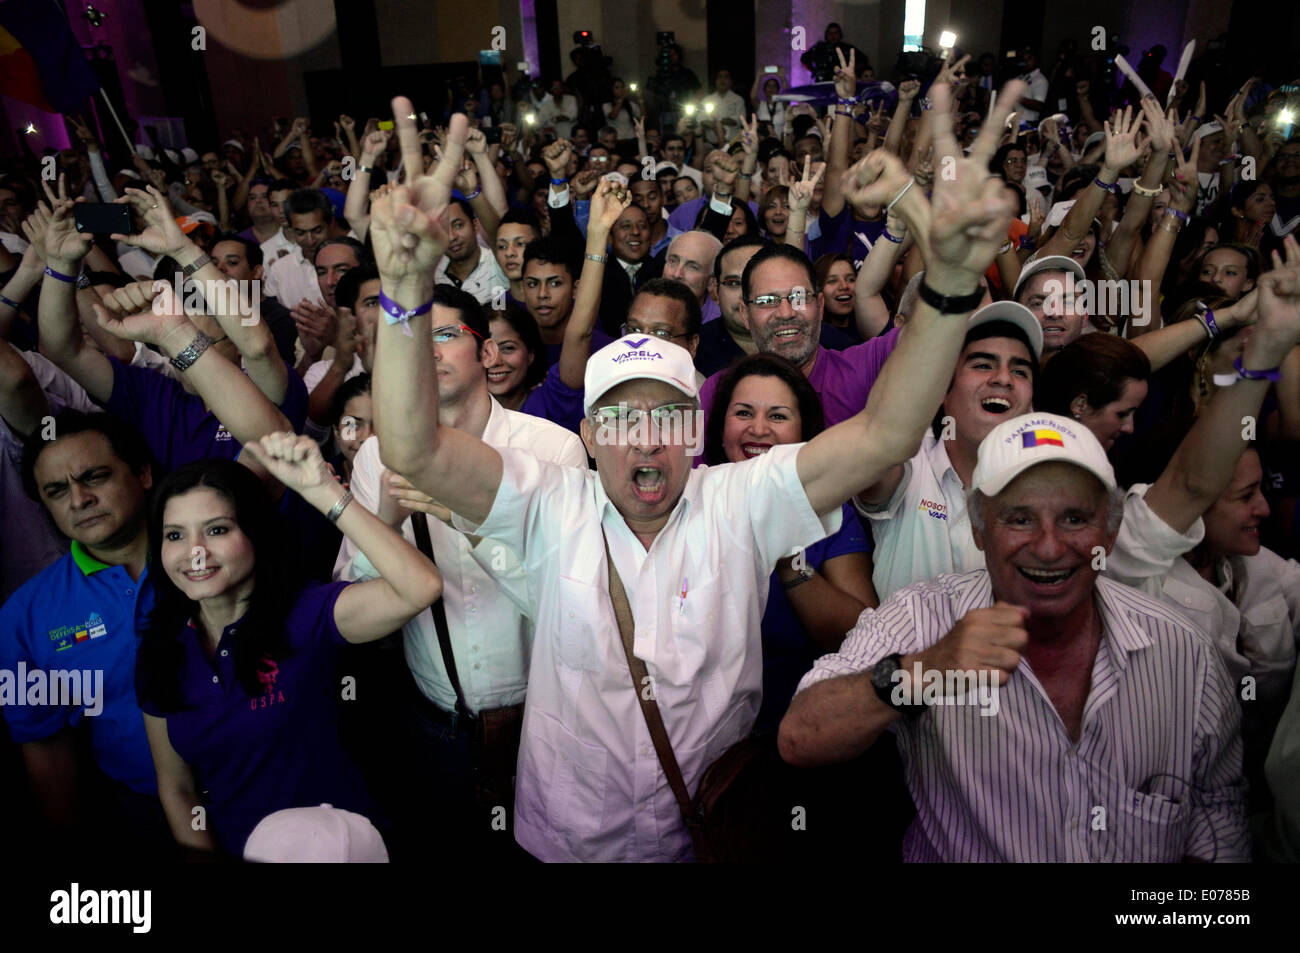 Panama City, Panama. 4th May, 2014. Supporters of presidential candidate Juan Carlos Varela from the Panamenista Party react after the preliminary results of the general elections, in Panama City, capital of Panama, on May 4, 2014. President of the Supreme Electoral Court Erasmo Pinilla said on Sunday night that Juan Carlos Varela is the virtual winner of Panama's presidency. © Mauricio Valenzuela/Xinhua/Alamy Live News Stock Photo